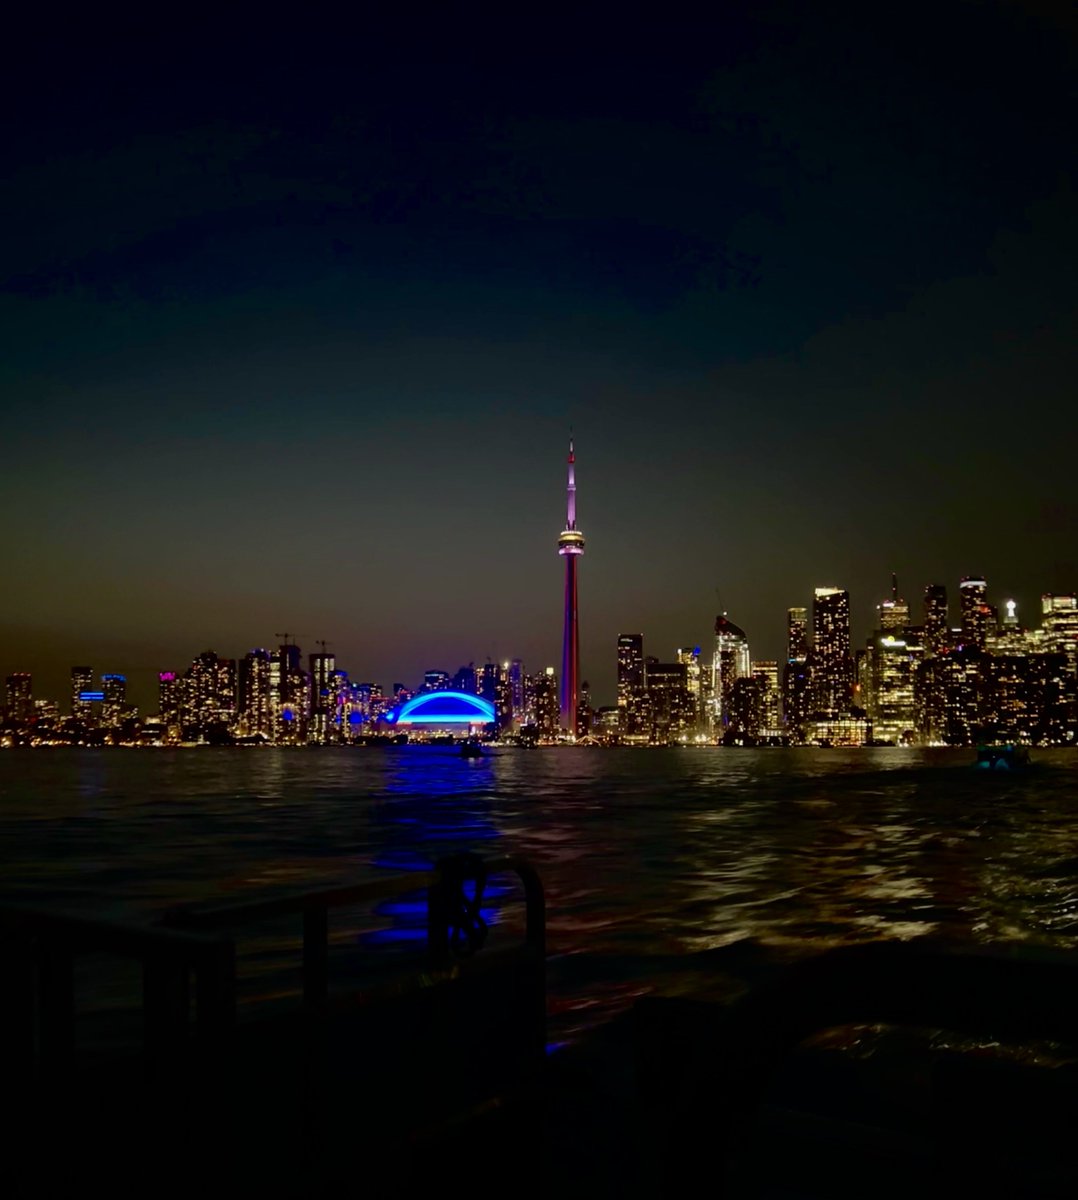 Glad to meet friends old and new! Between exciting research chatter and packed conference rooms, take a ride on the water and admire the Toronto skyline🤗 #ACL2023NLP